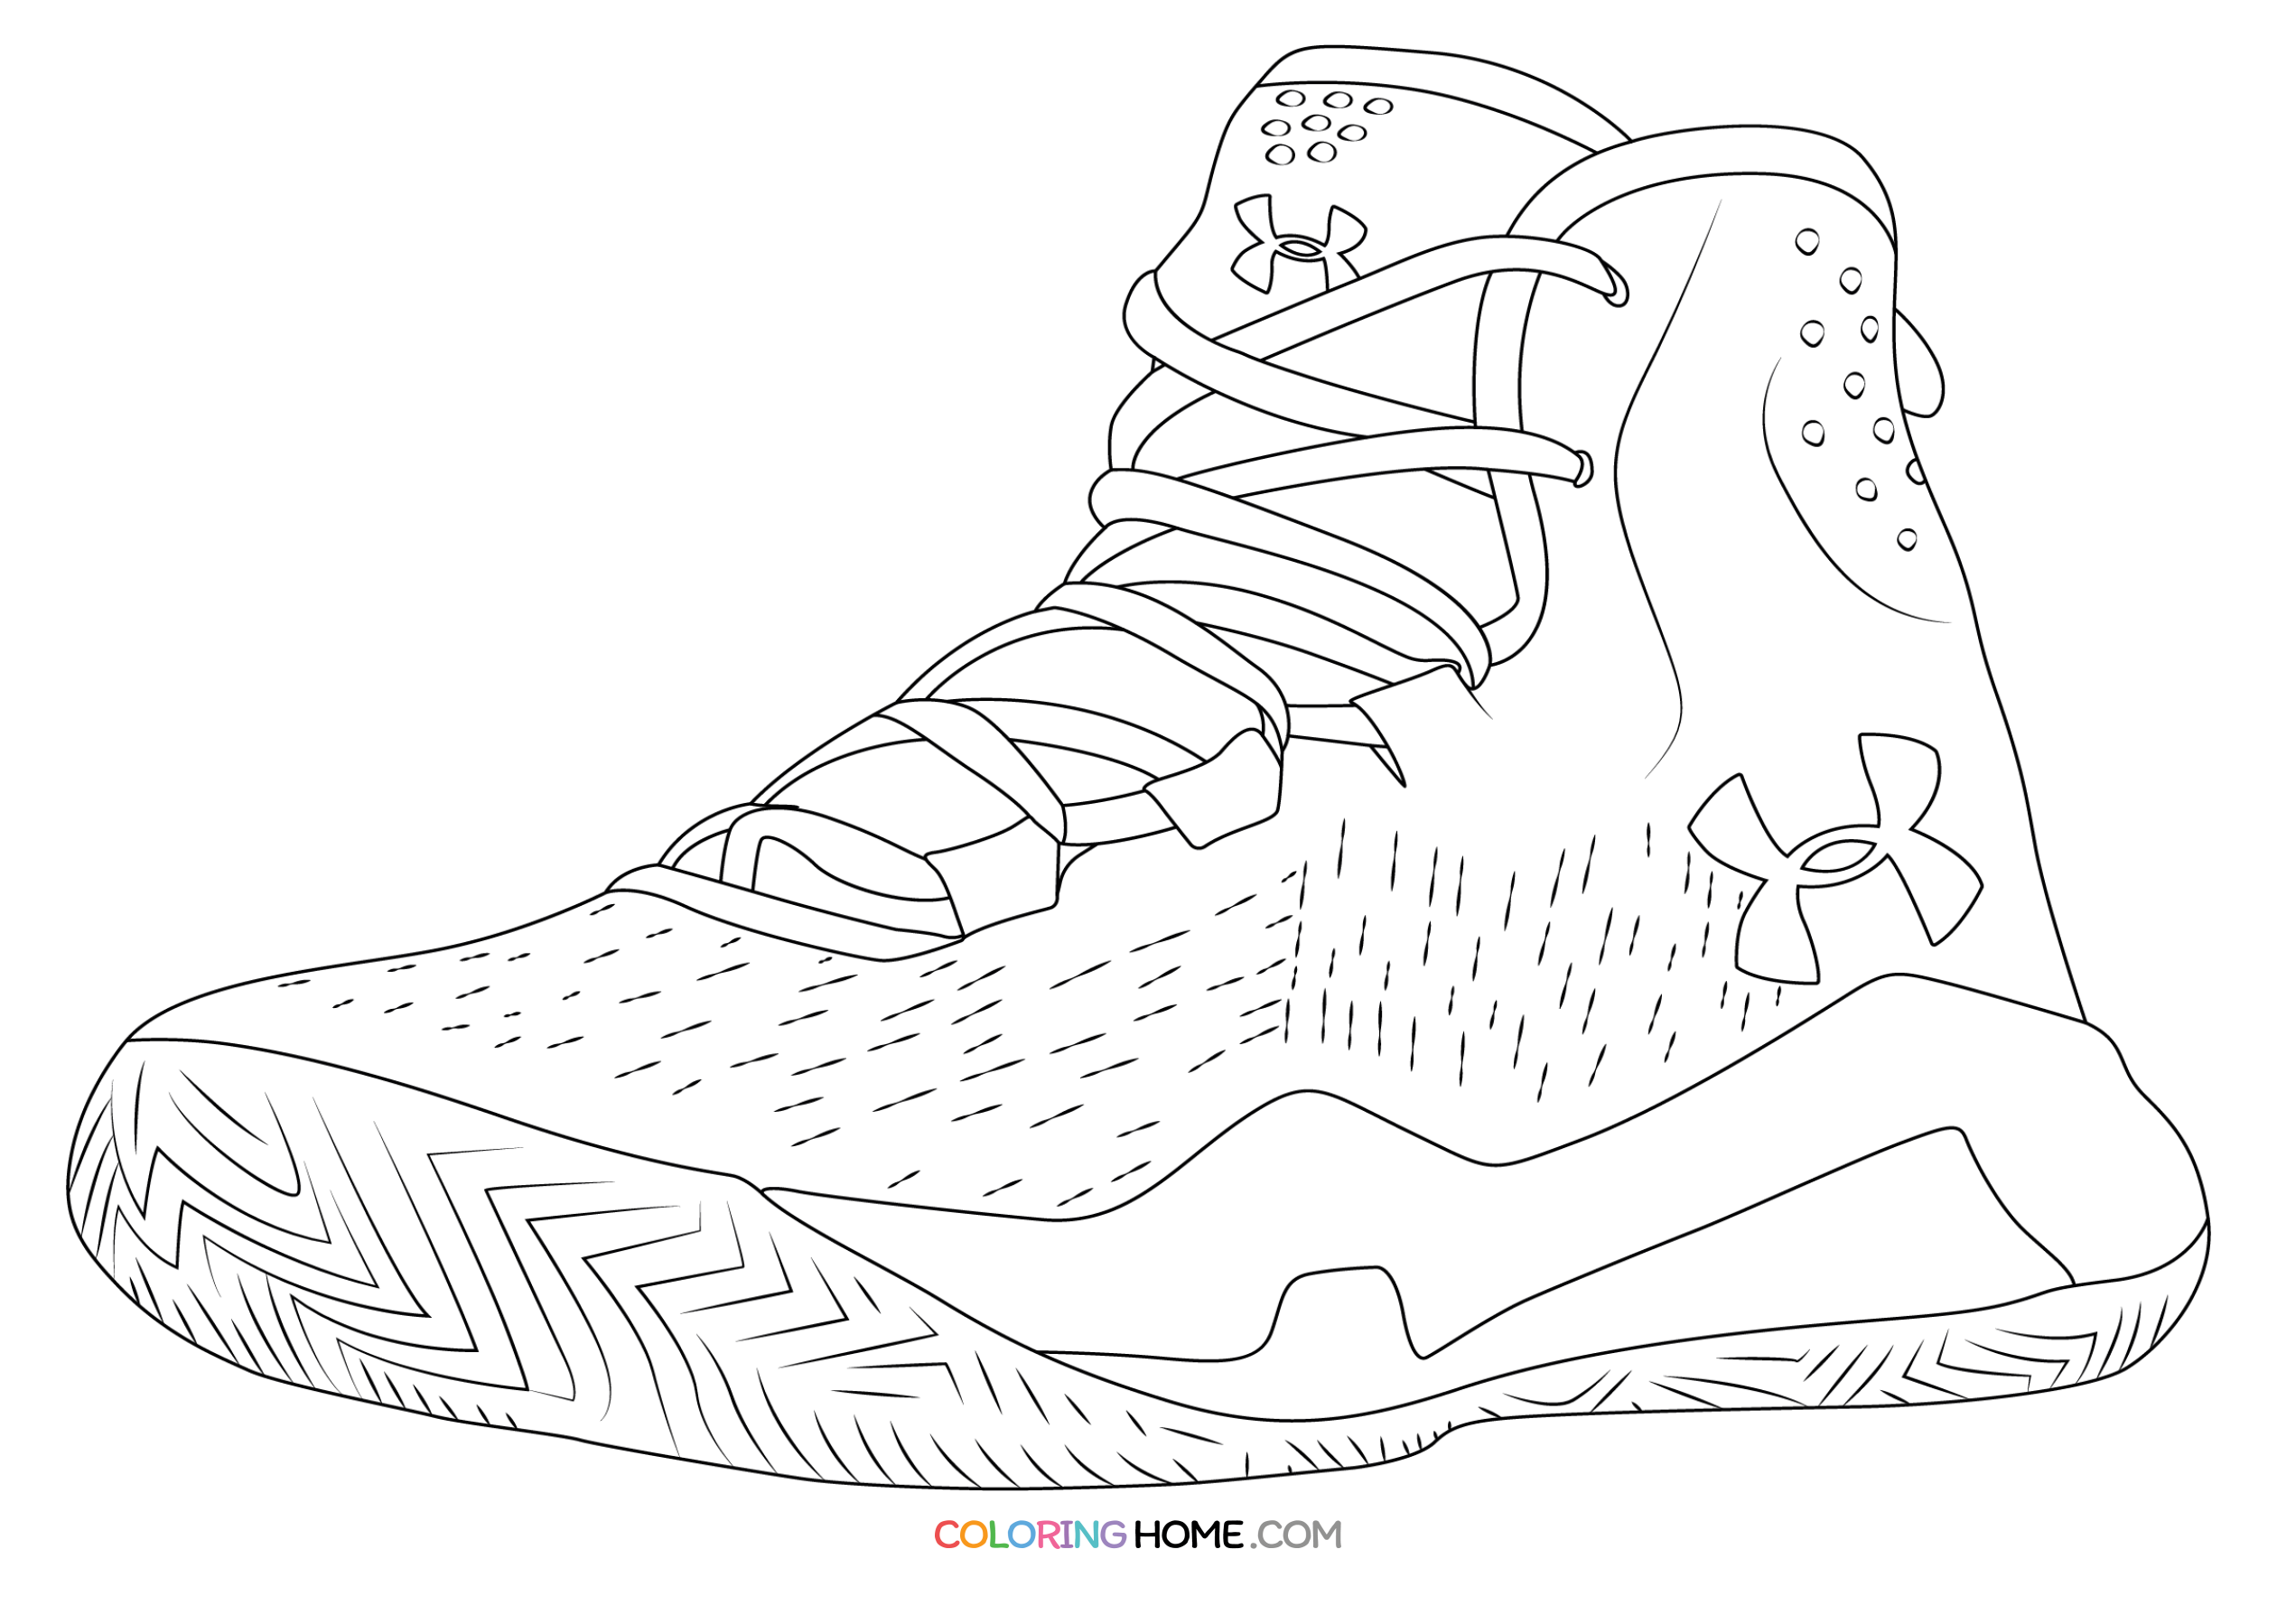 Under Armour coloring page